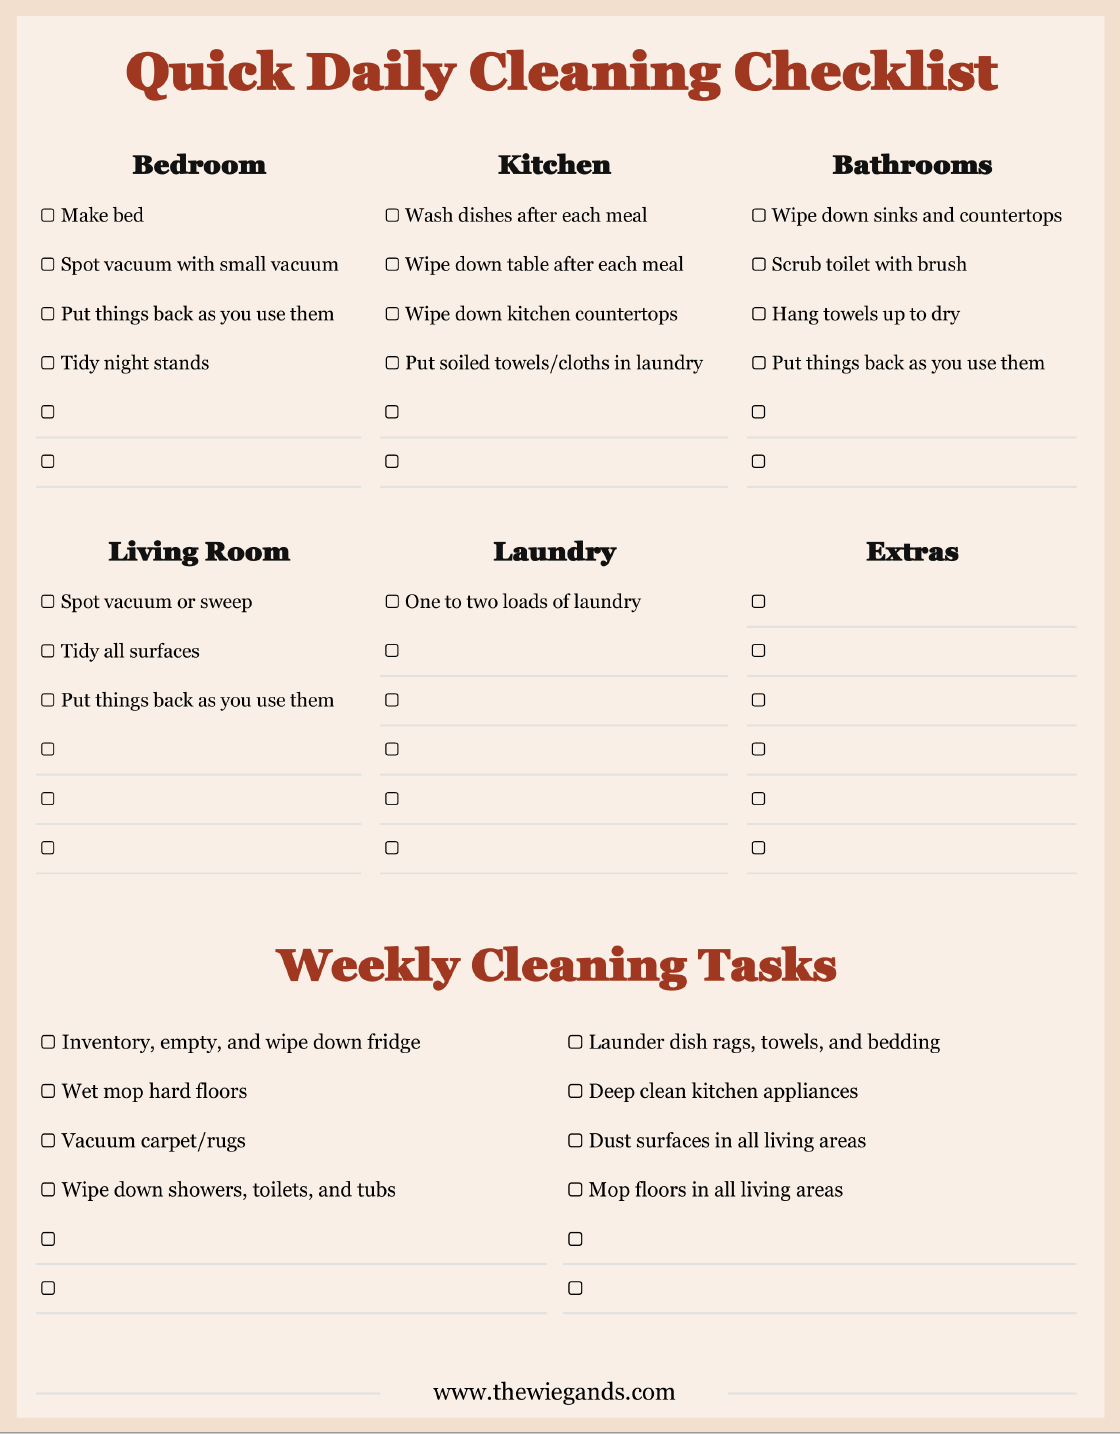 FREE Quick Daily Cleaning Checklist PDF Download